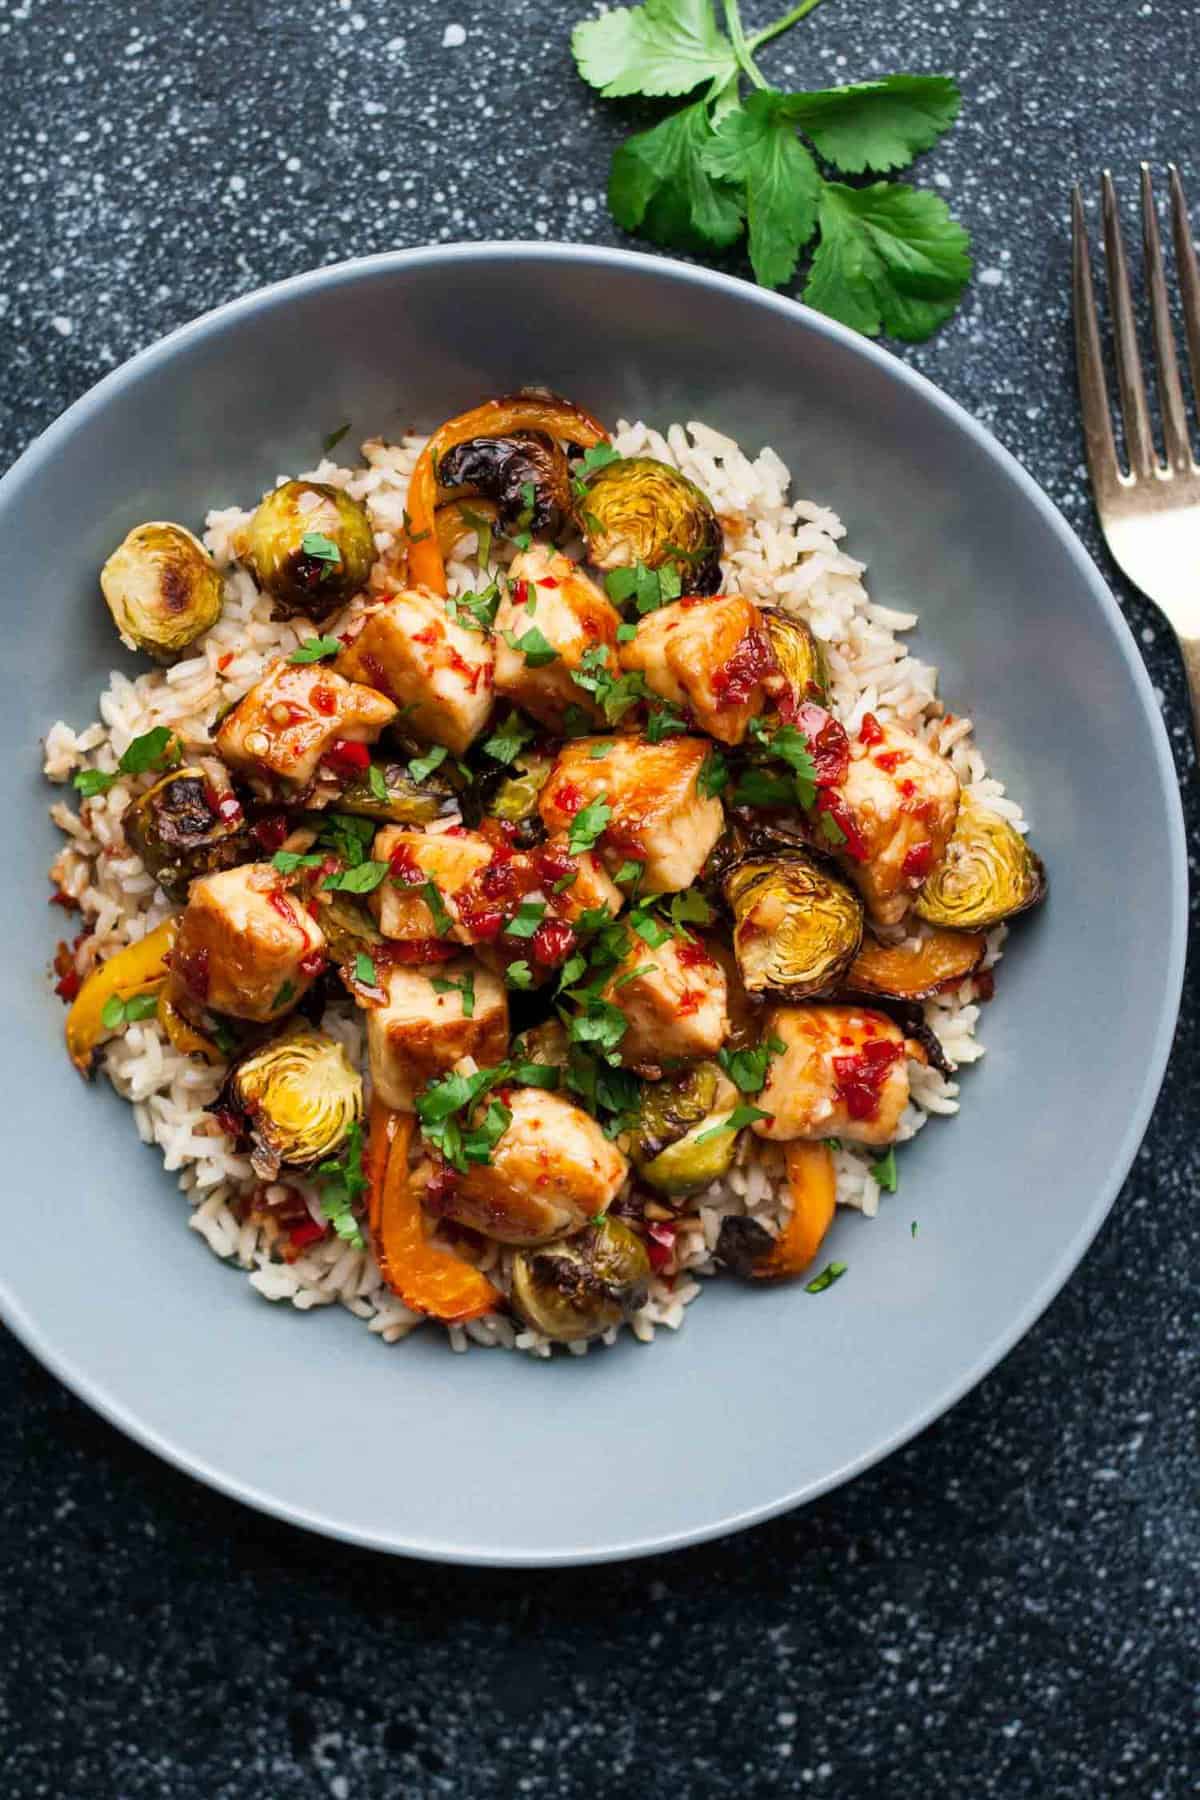 A bowl of rice topped with caramelized brussel sprouts with halloumi in a sweet chilli sauce.